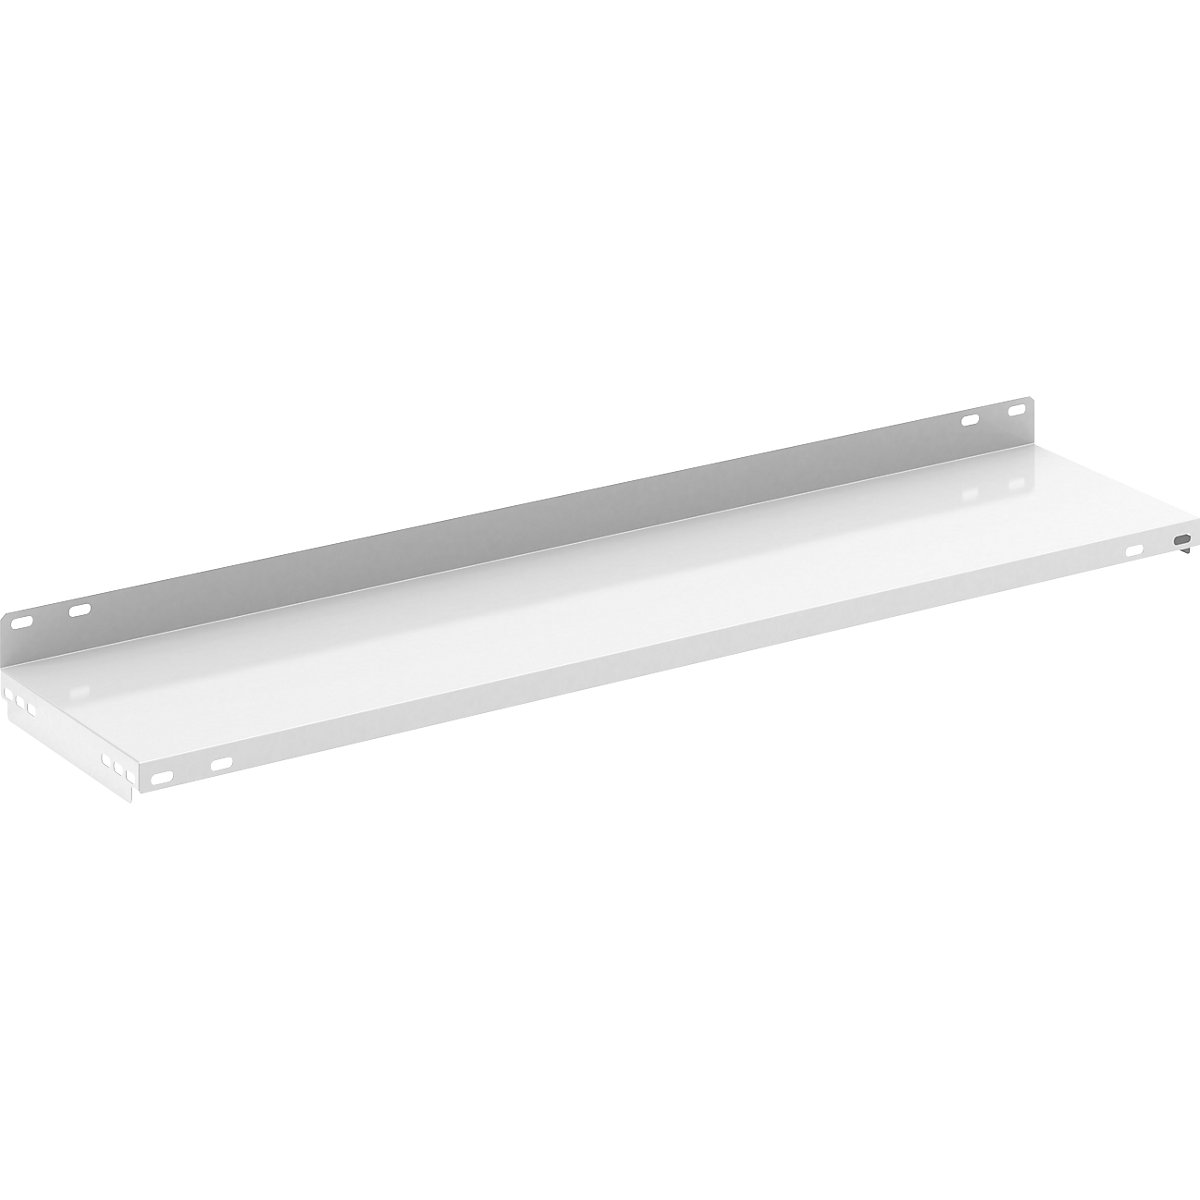 Shelf with supports – hofe, zinc plated and plastic coated, WxD 1000 x 300 mm